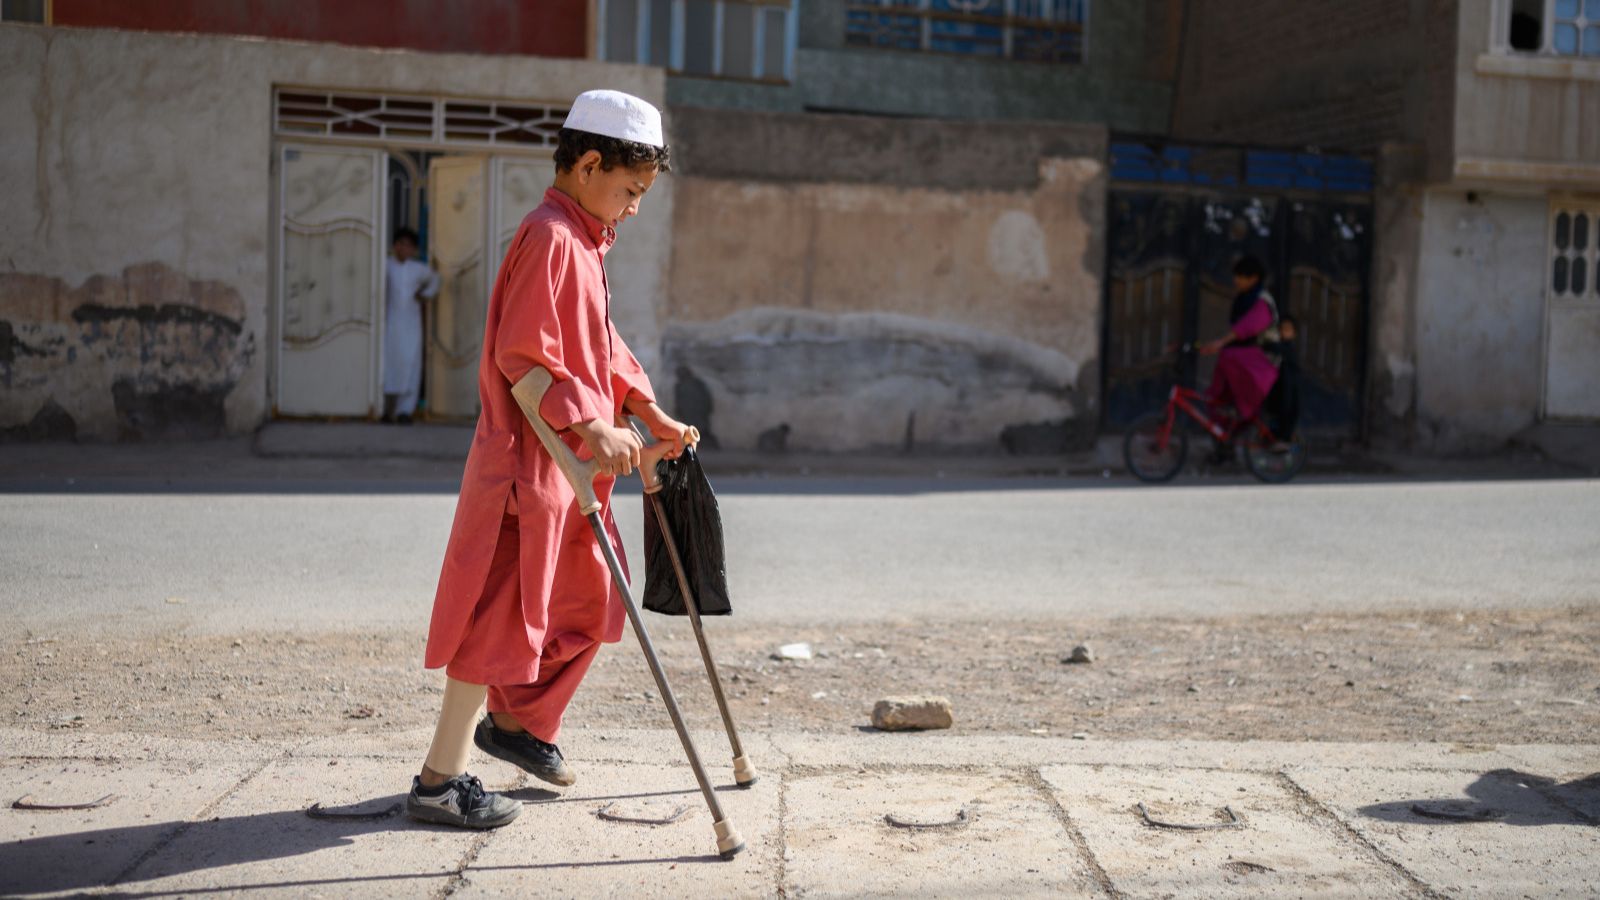 A young Afghan boy wearing a coral outfit and an artificial limb walks down a sidewalk with elbow crutches